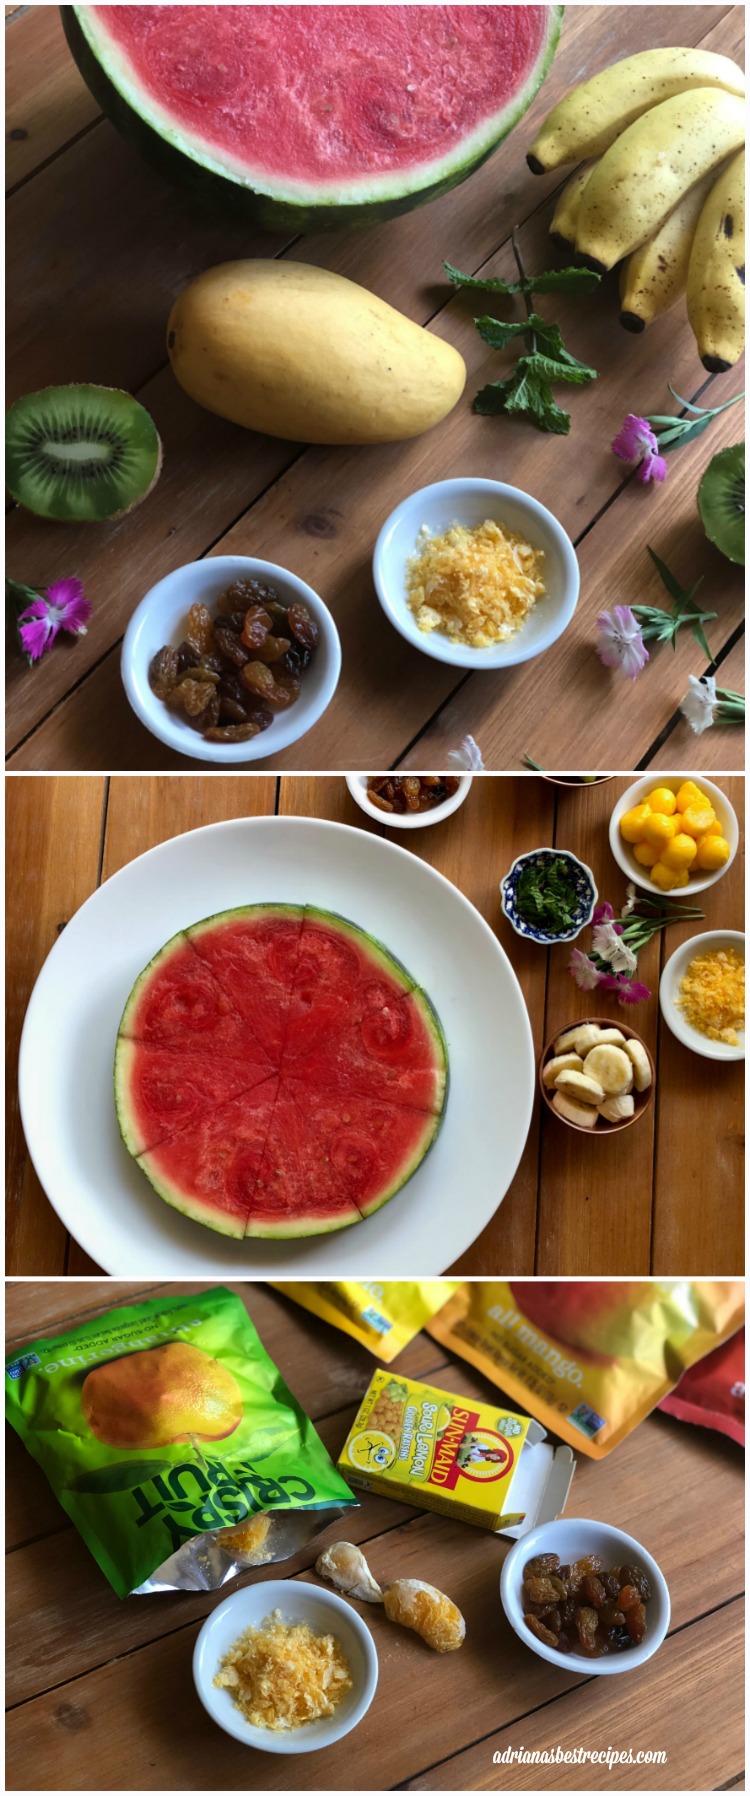 Ingredients for the fresh watermelon pizza